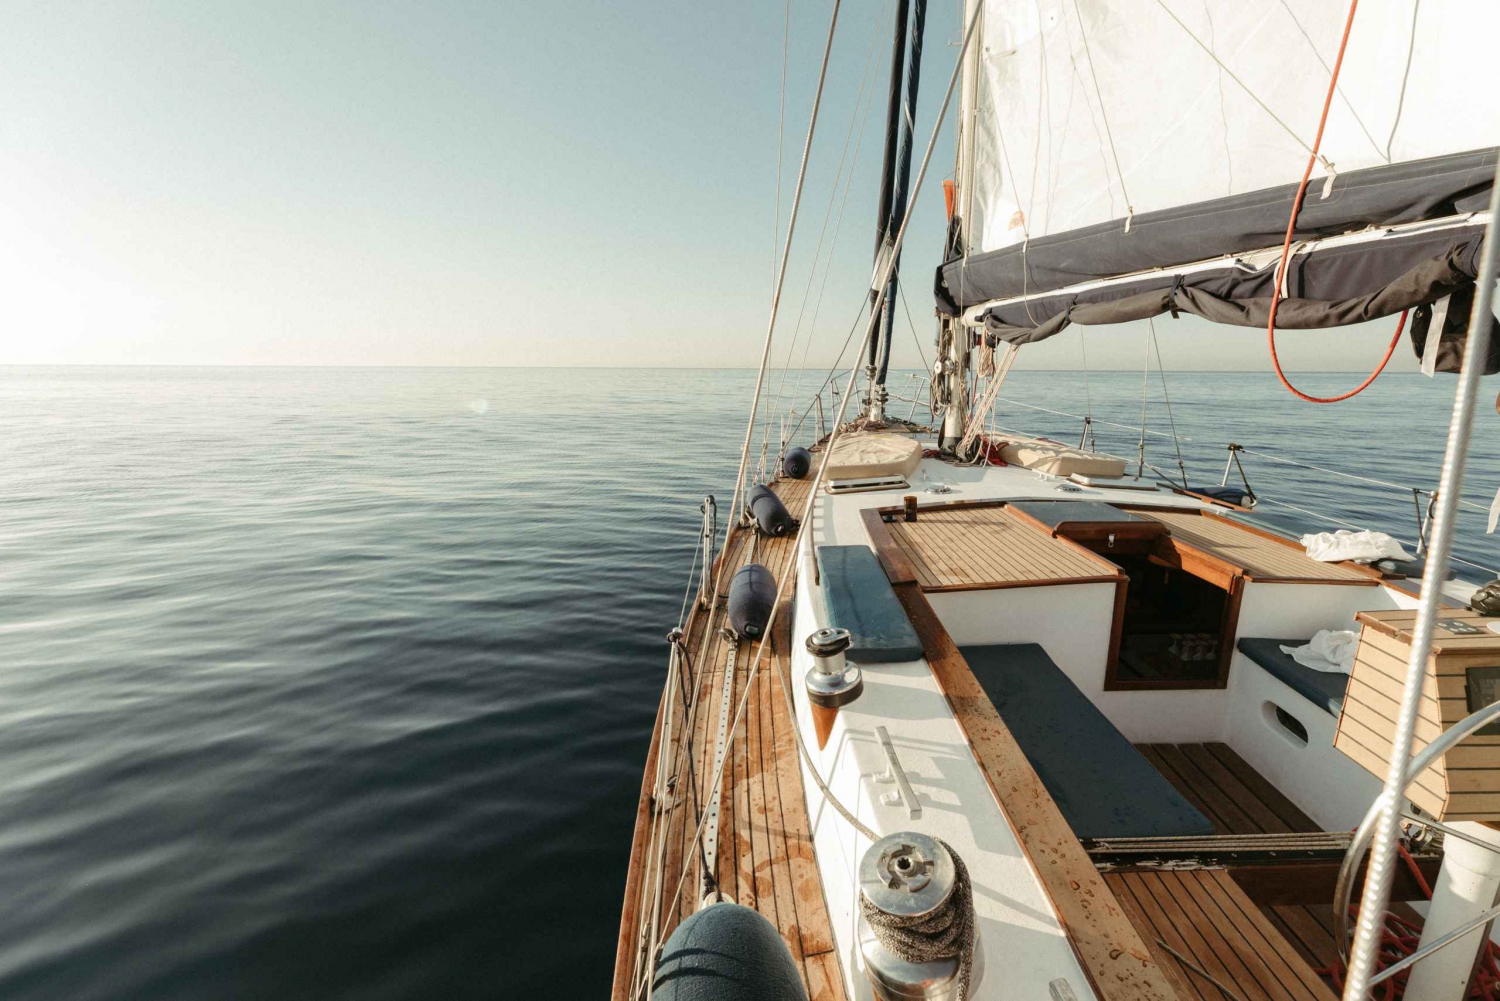 Discover Barcelona on a Classical Sailing Boat